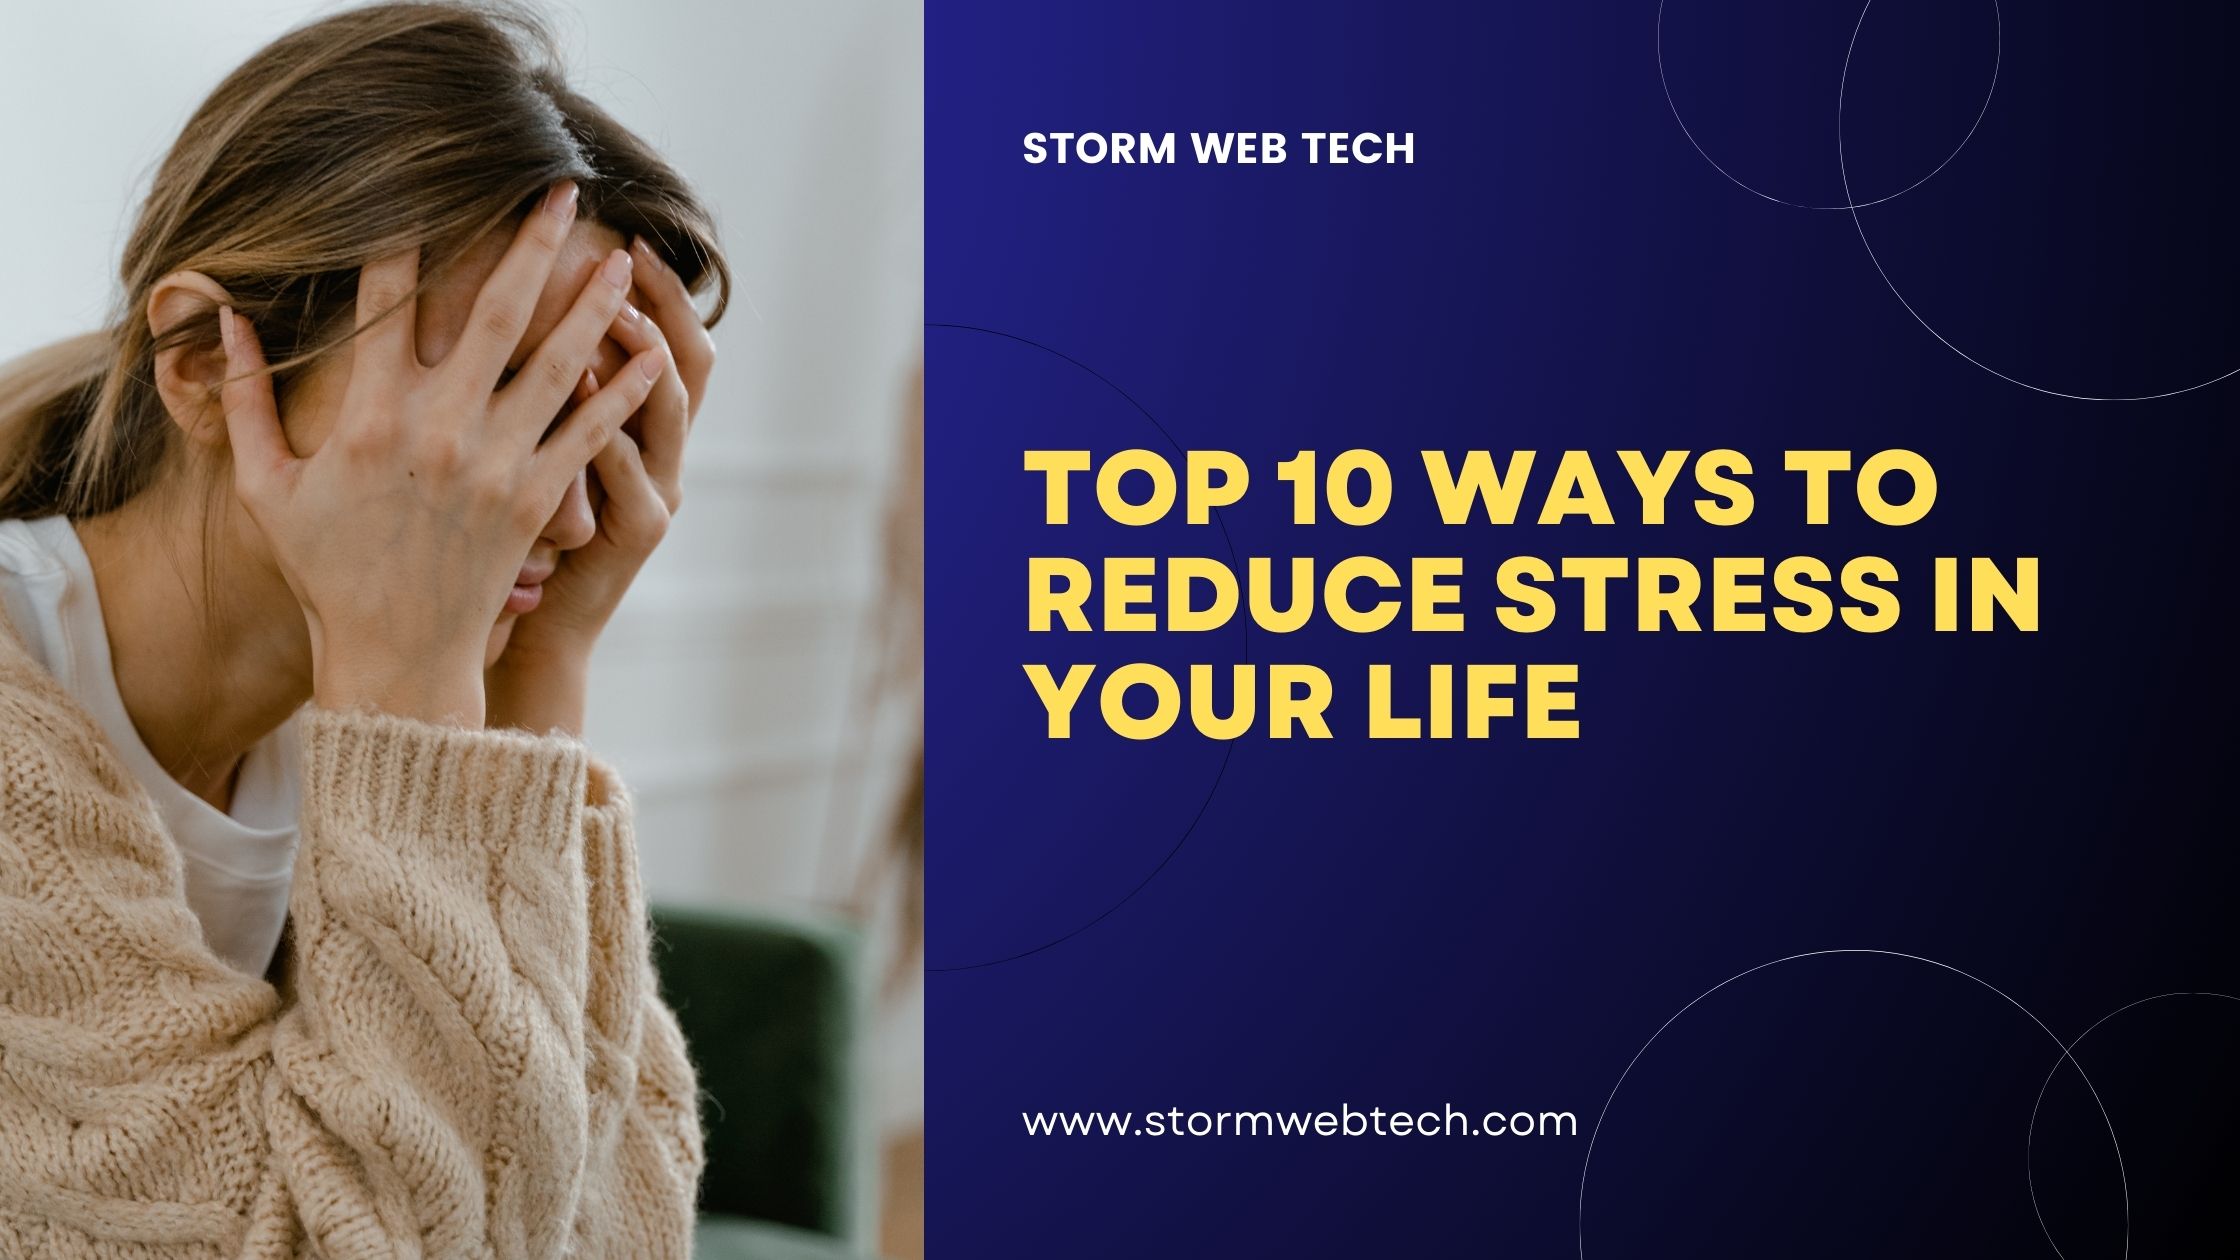 By incorporating these top 10 ways to reduce stress into your daily routine, you can effectively manage and reduce stress levels.